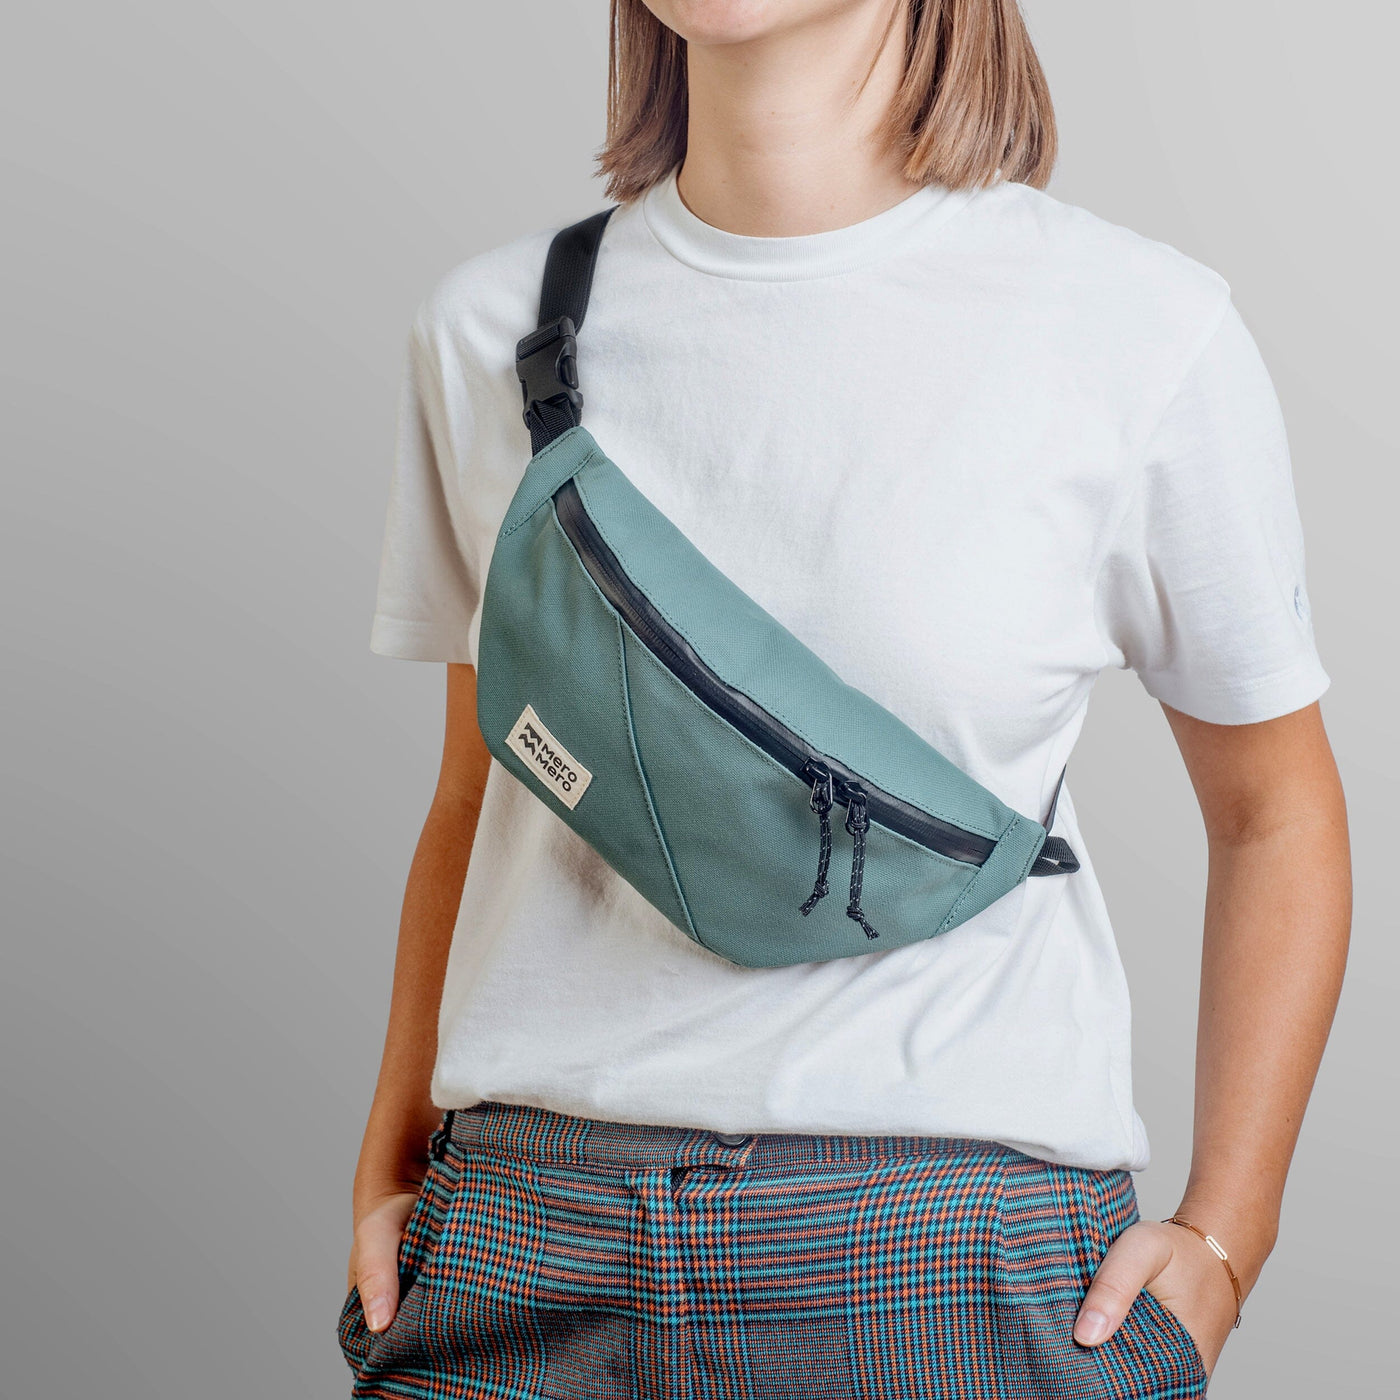 woman wearing mero mero mini hoian small recycled fanny pack as chest bag